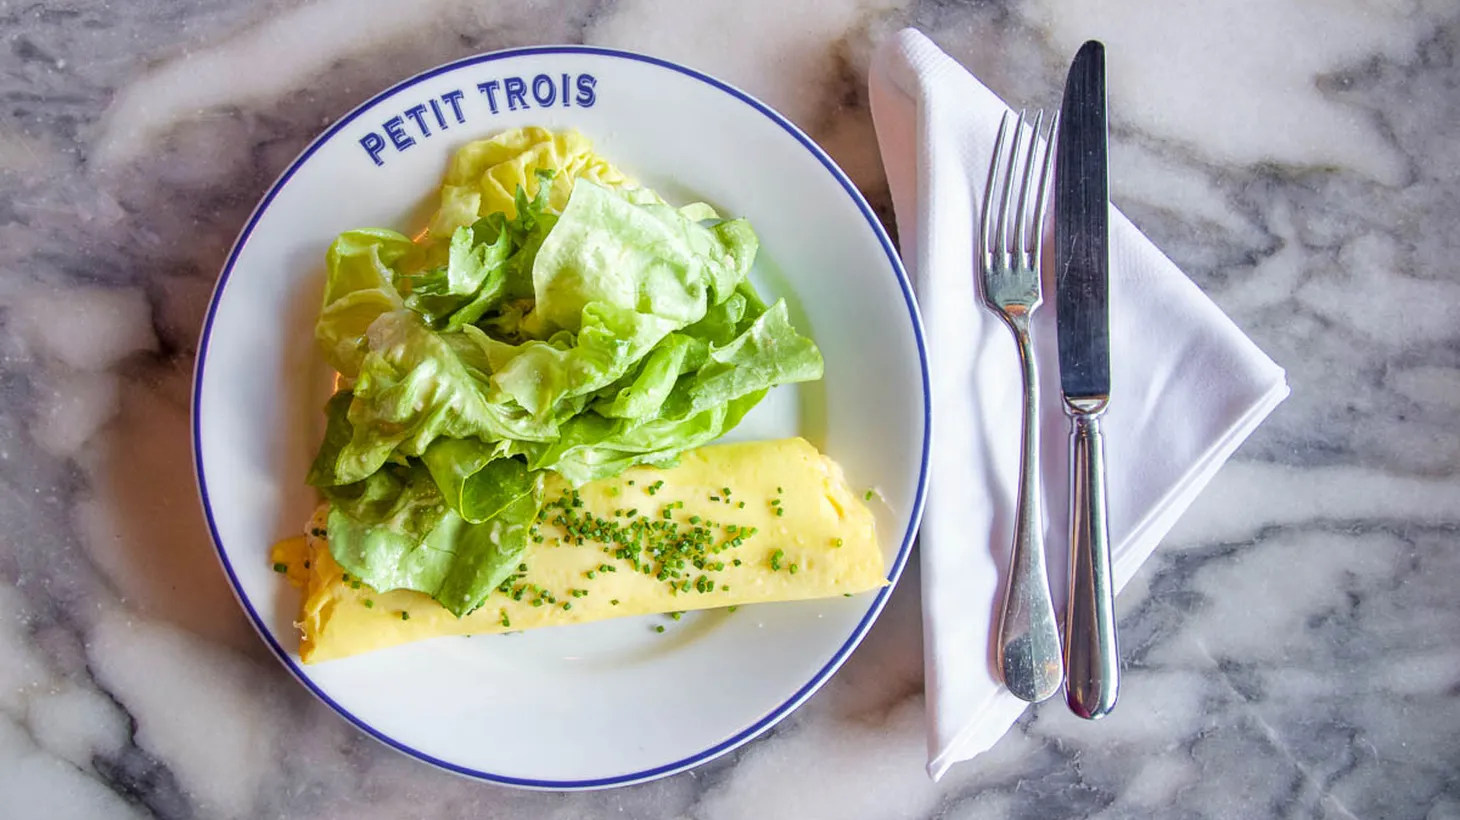 The omelet at Petit Trois, made with three eggs, butter, salt, white pepper, Boursin, and chives, is served with a simple side salad.